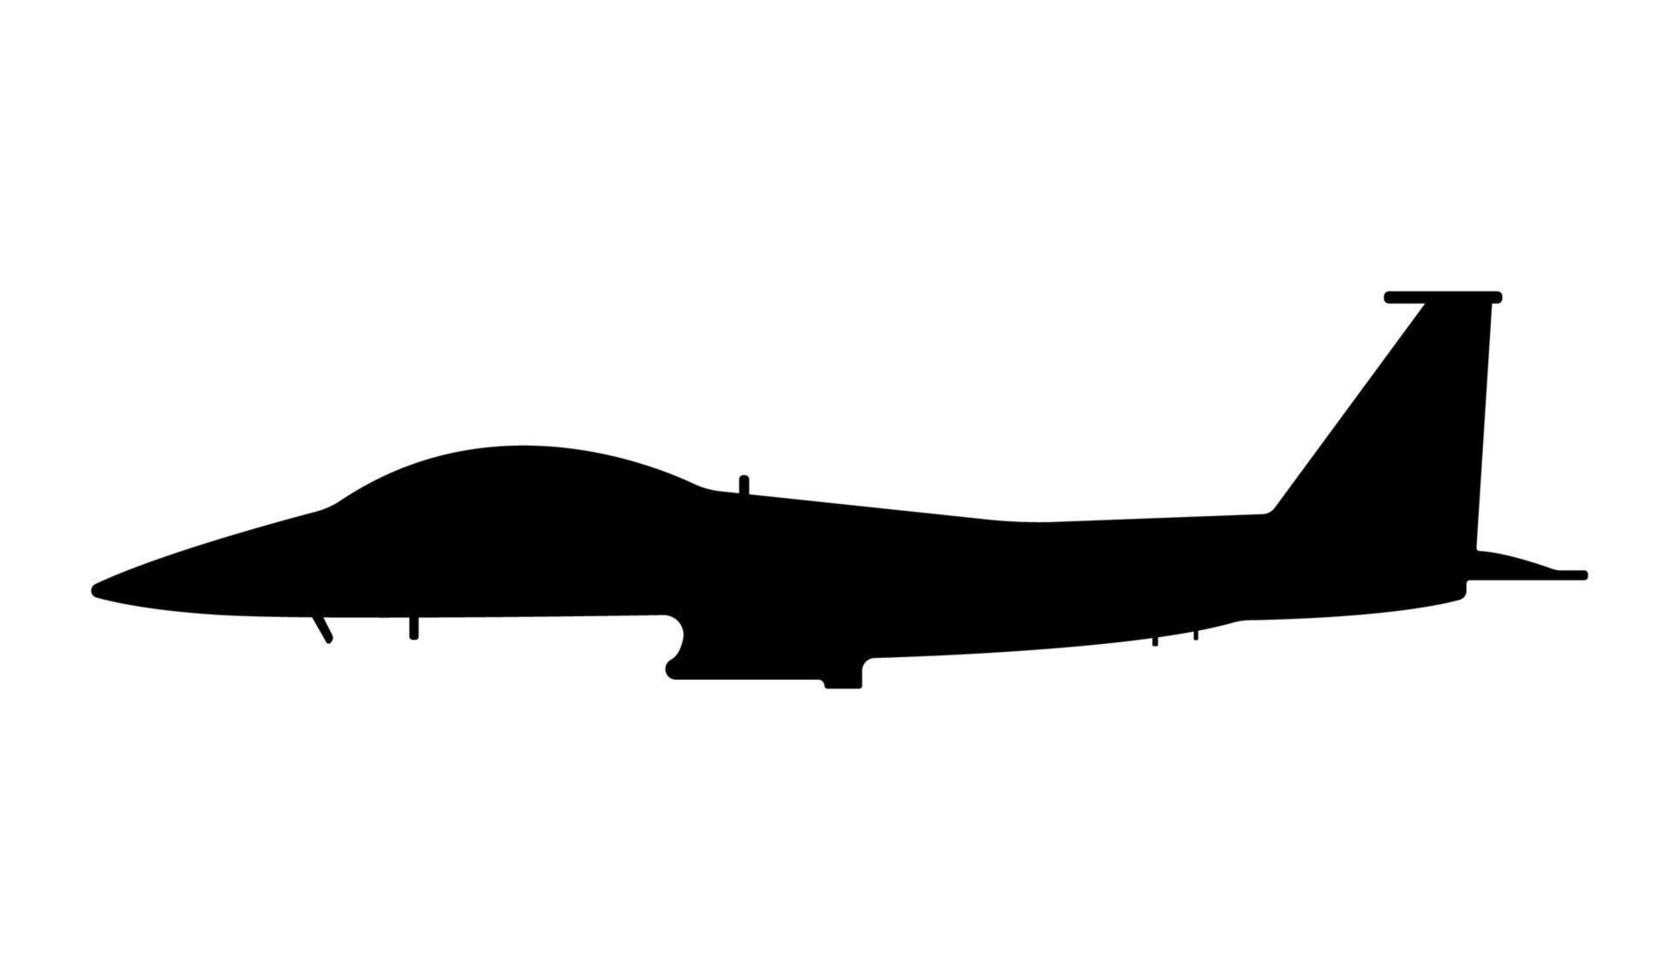 Jet Fighter Aircraft Silhouette, Fighting Falcon Air Force Army Weapon Illustration. vector